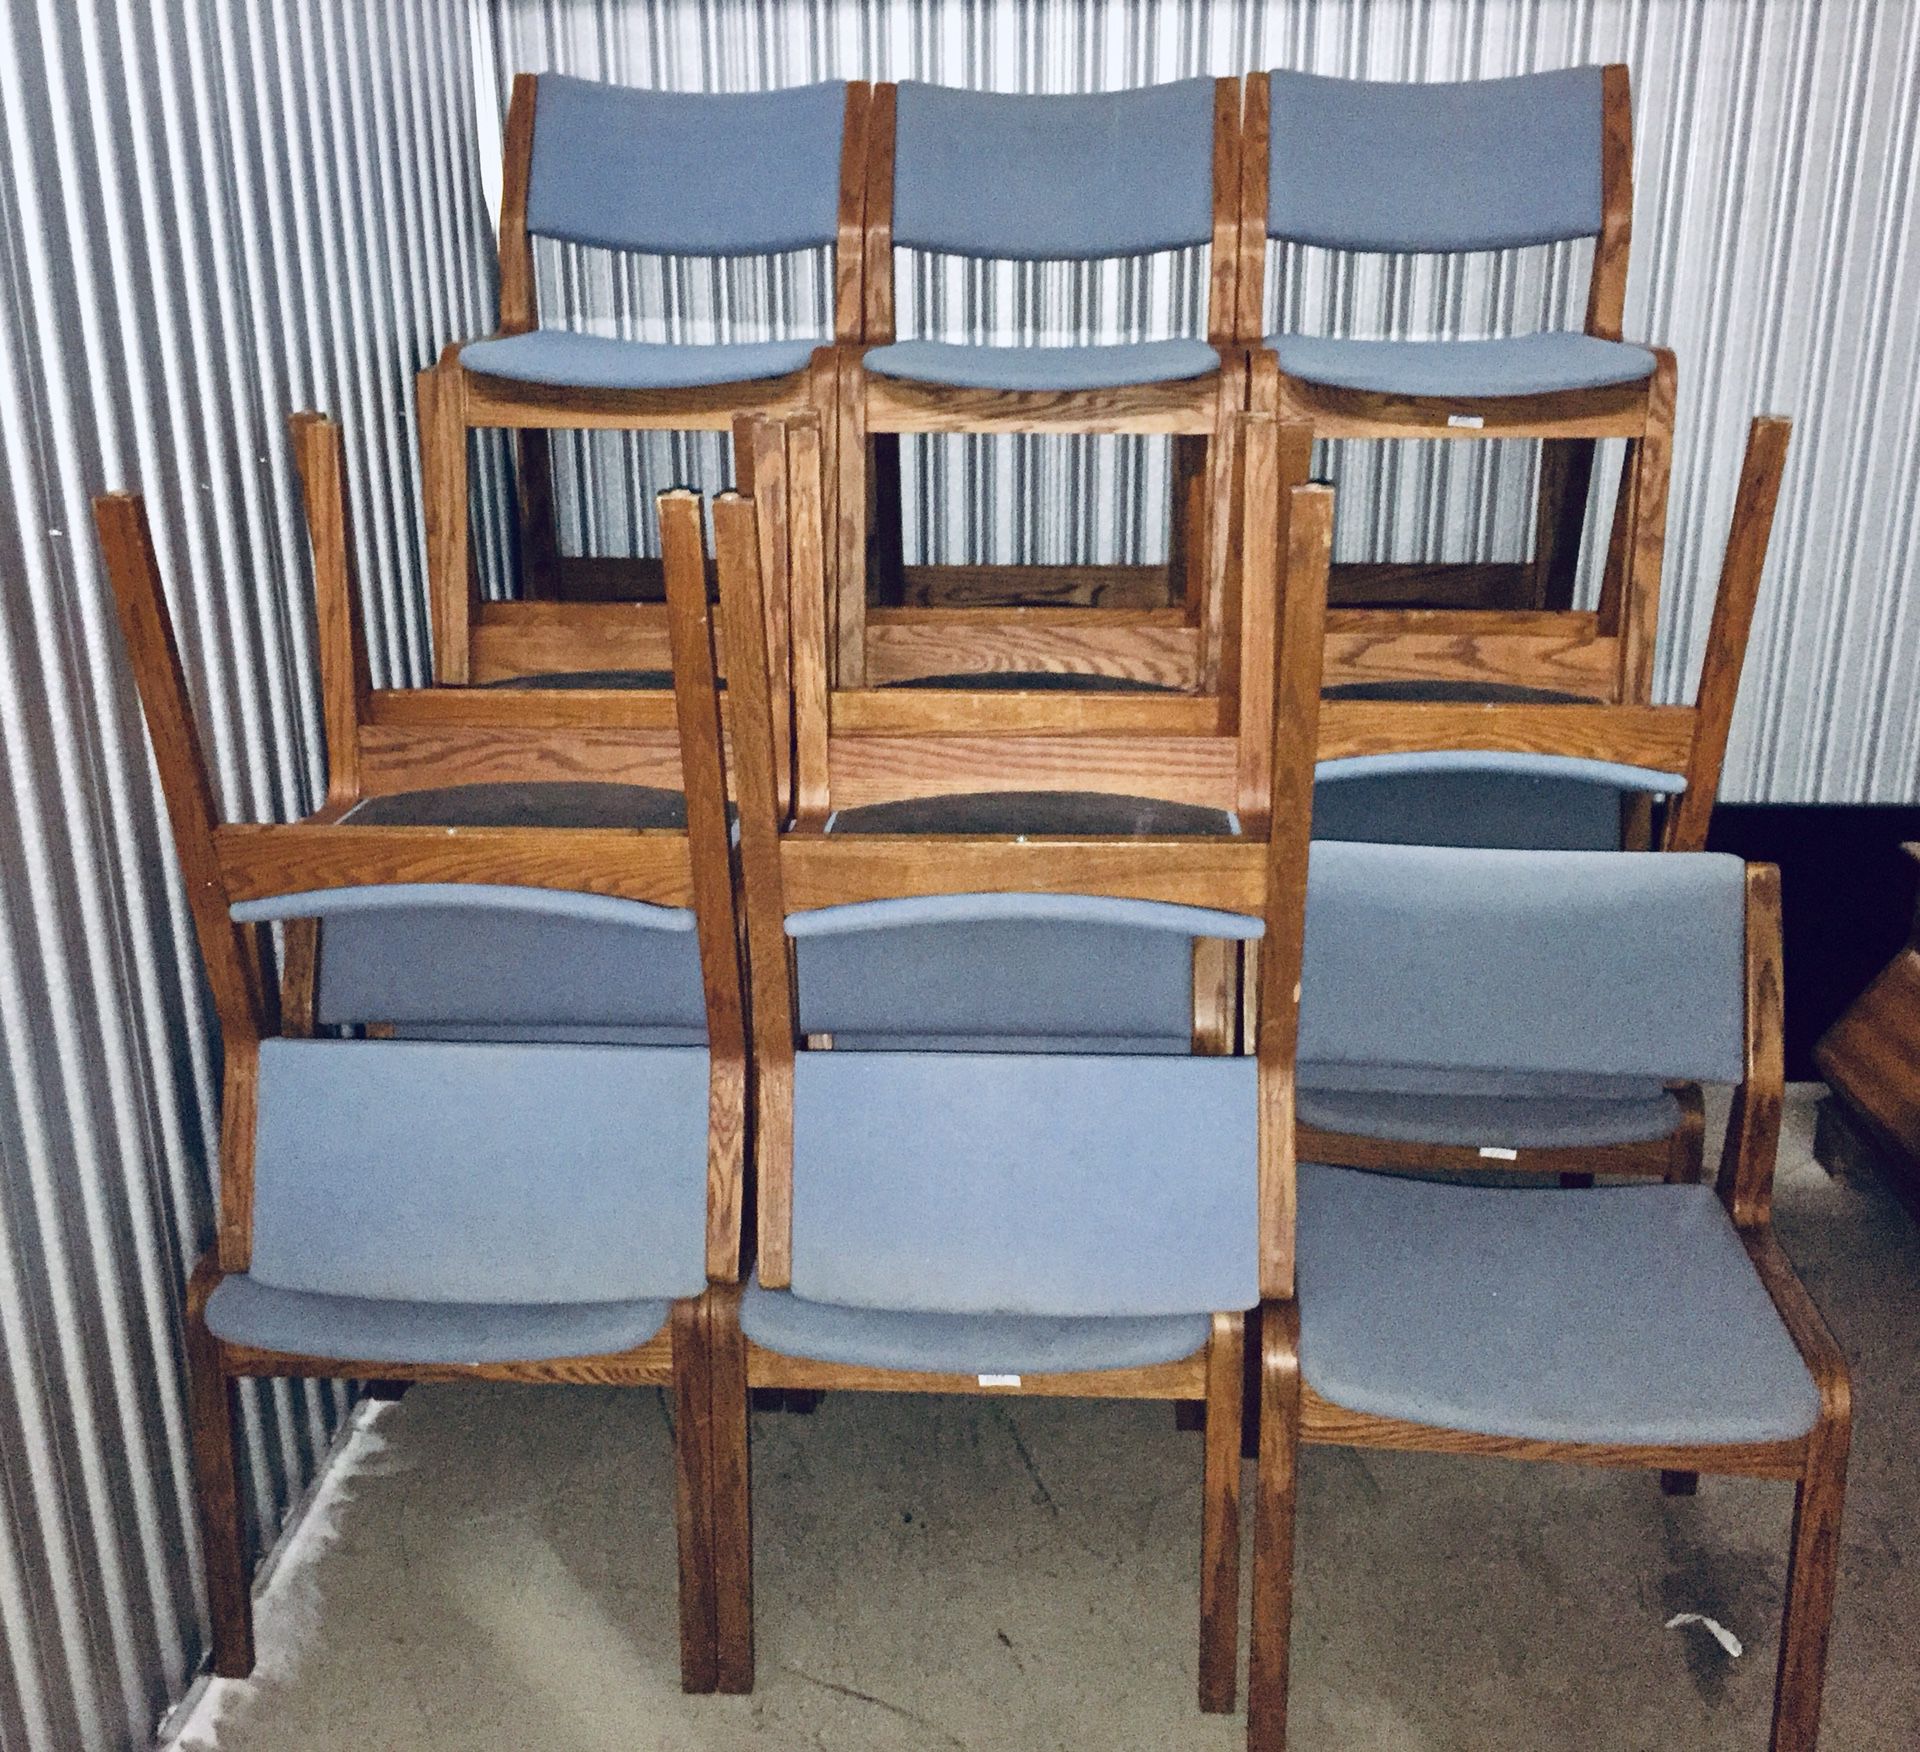 18 matching chairs oak frame upholstered blue seat